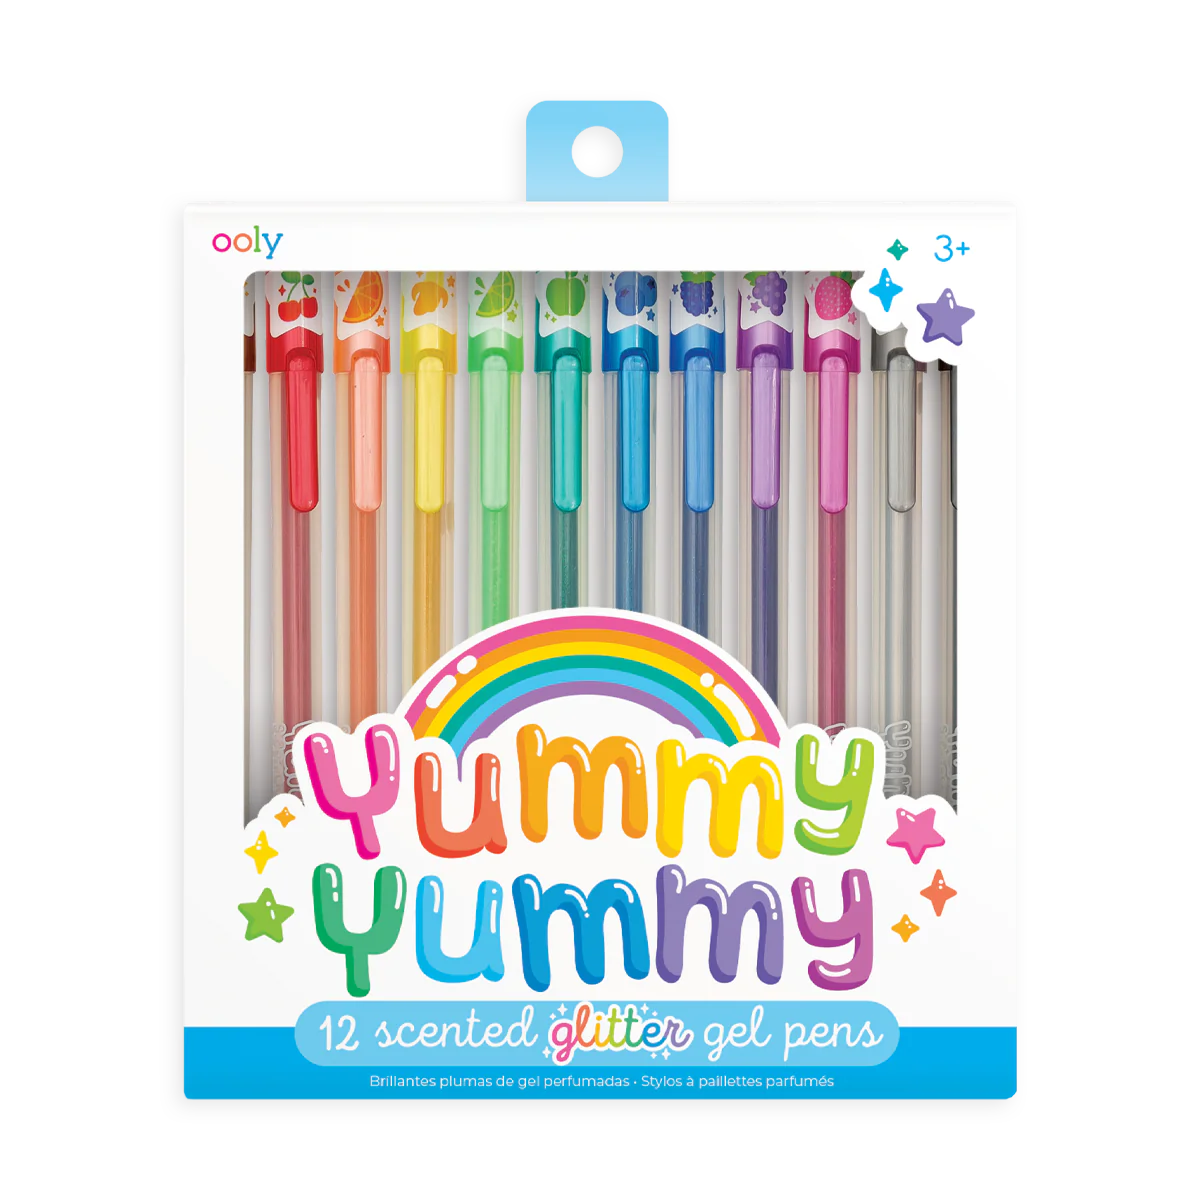 Yummy Yummy Scented Colored Glitter Gel Pens 2.0